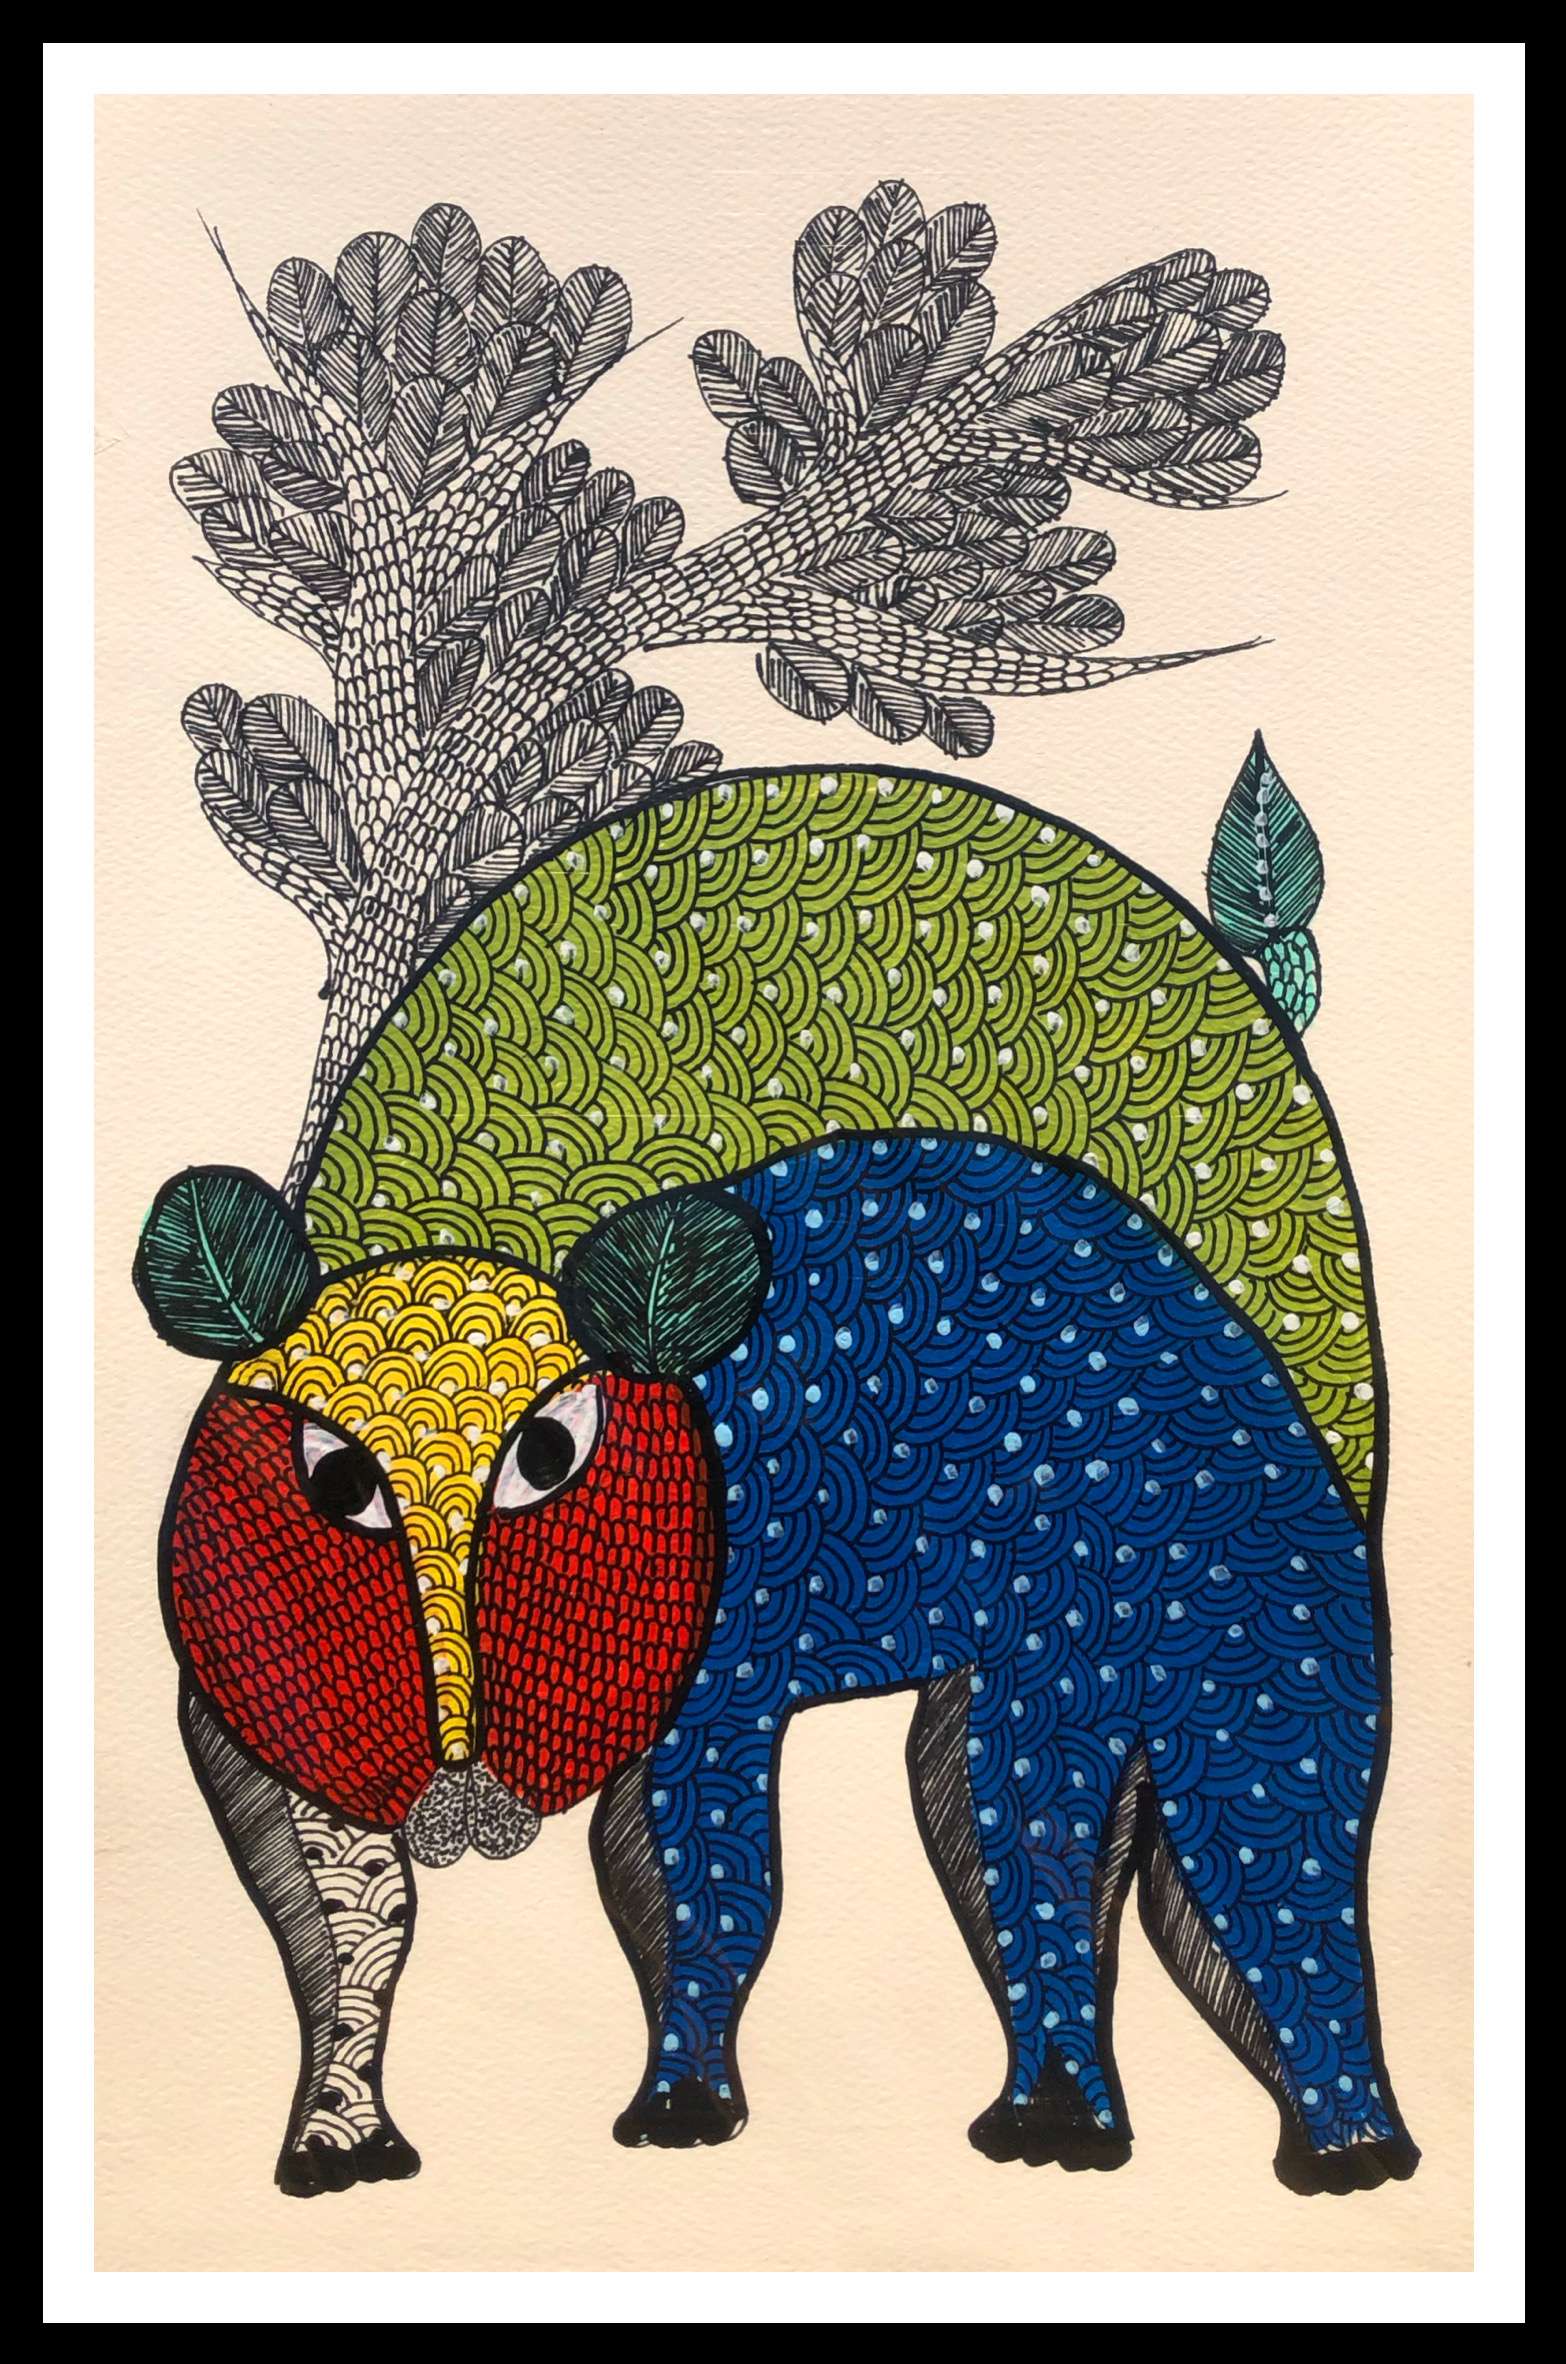 Gond Art Painting |Traditional Art Painting |Framed Gond Painting for Home & Office Wall Art Decor